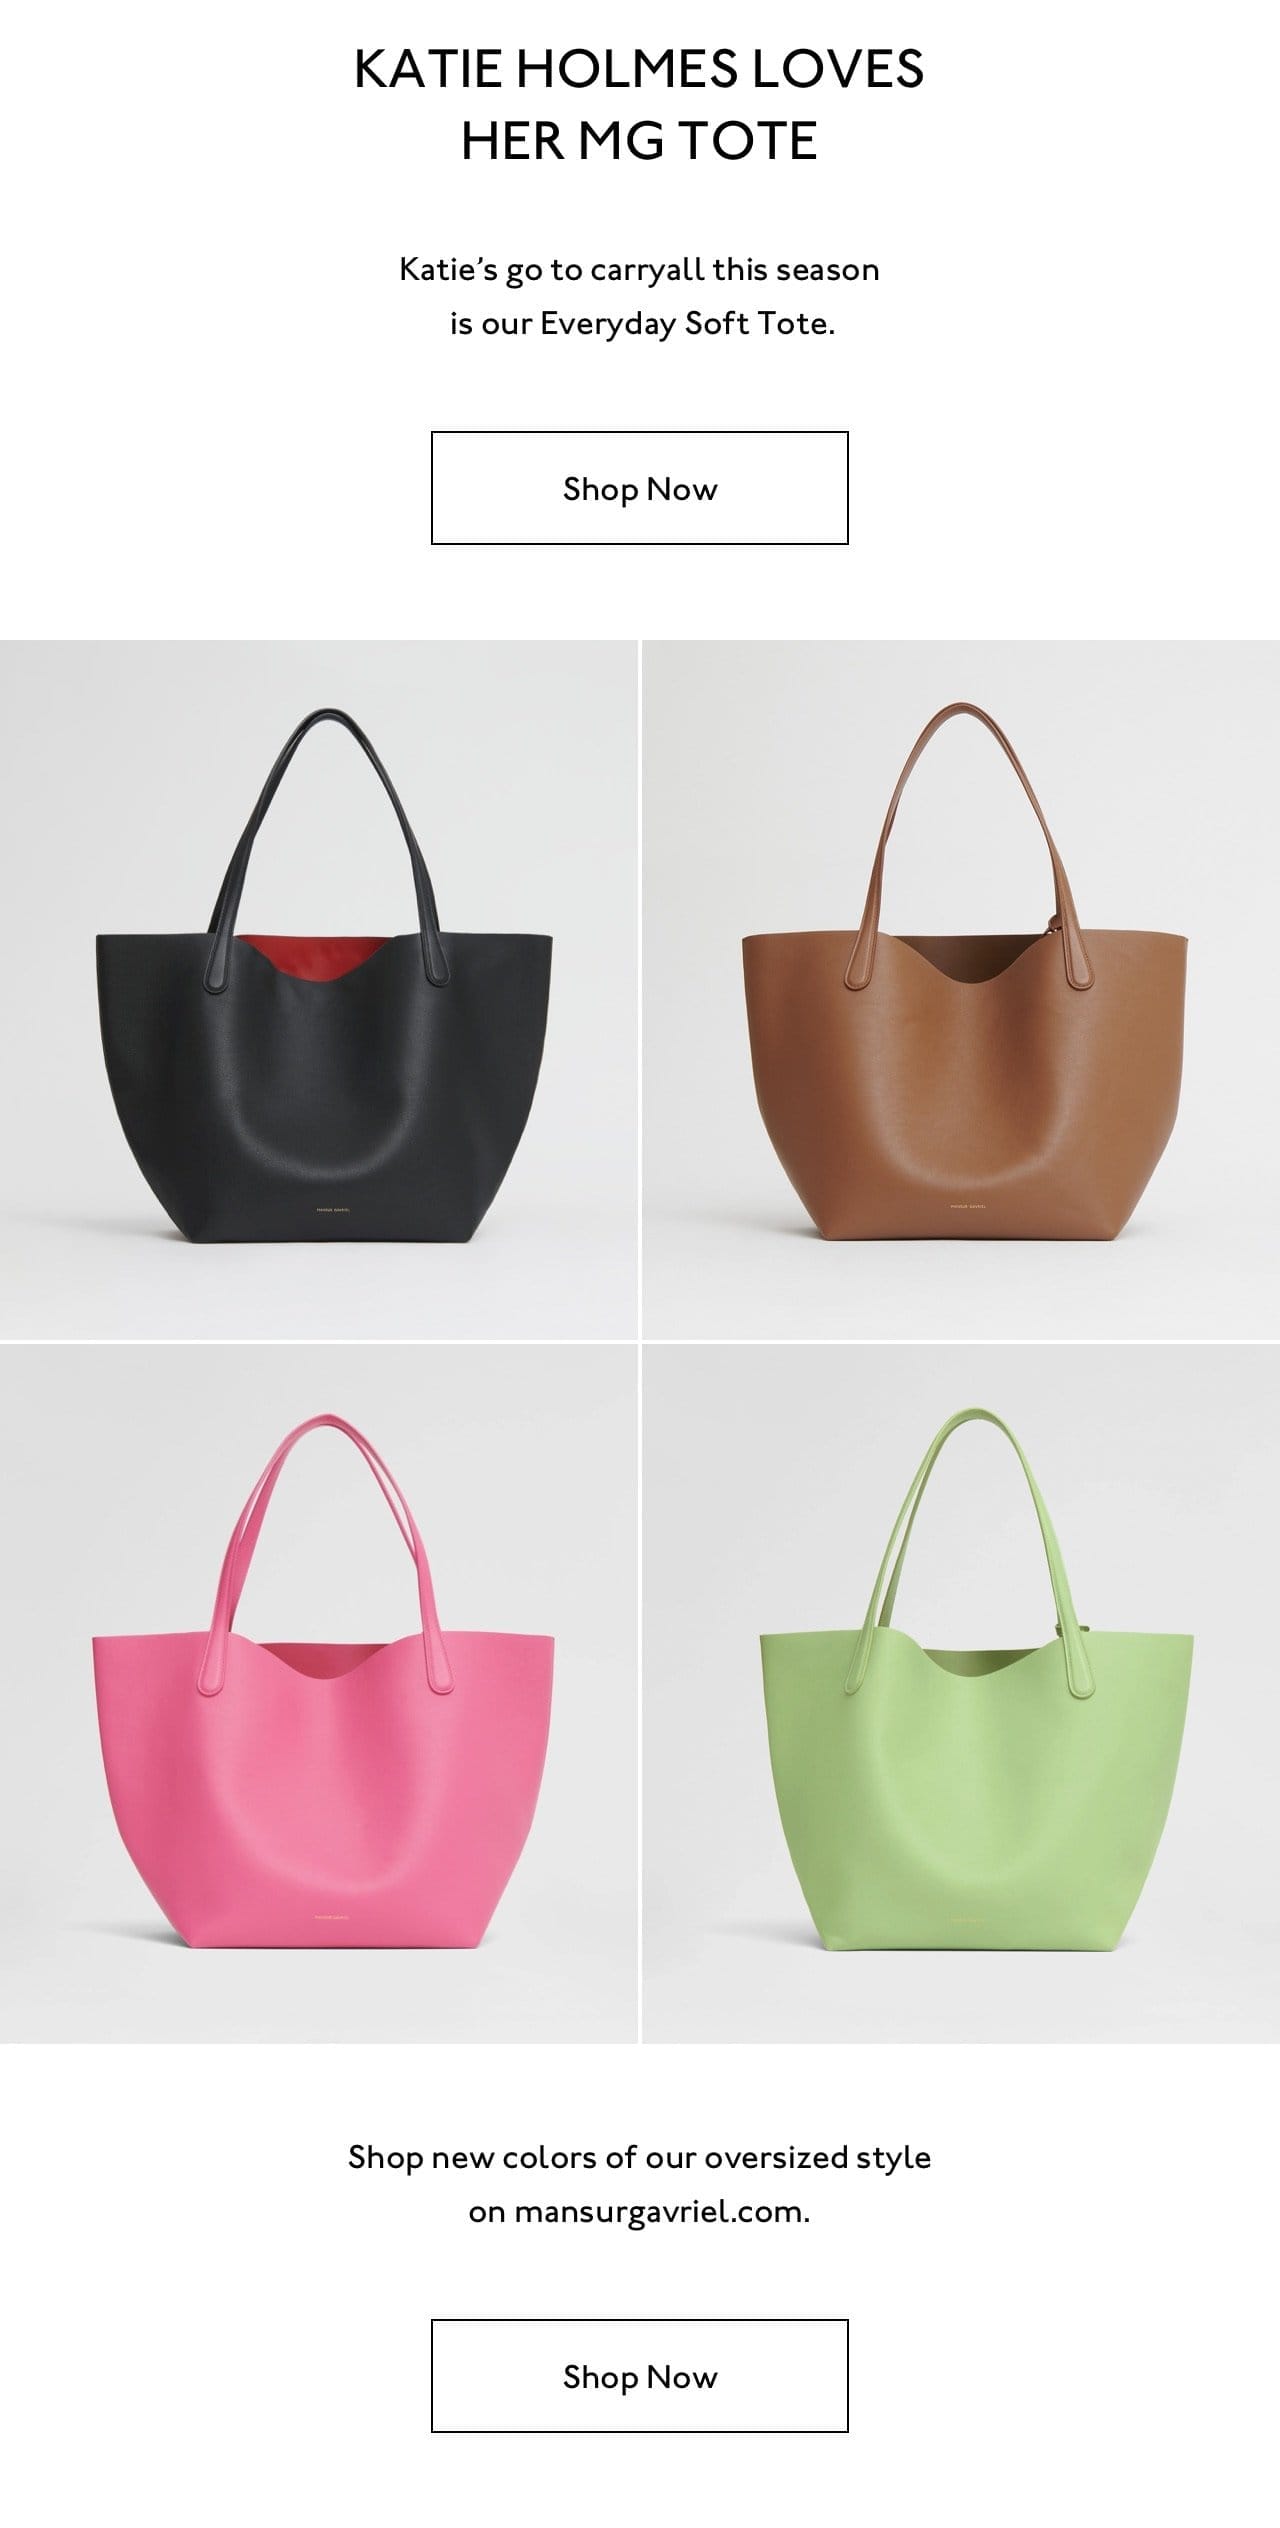 Shop new colors of our oversized Everyday Soft Tote now.